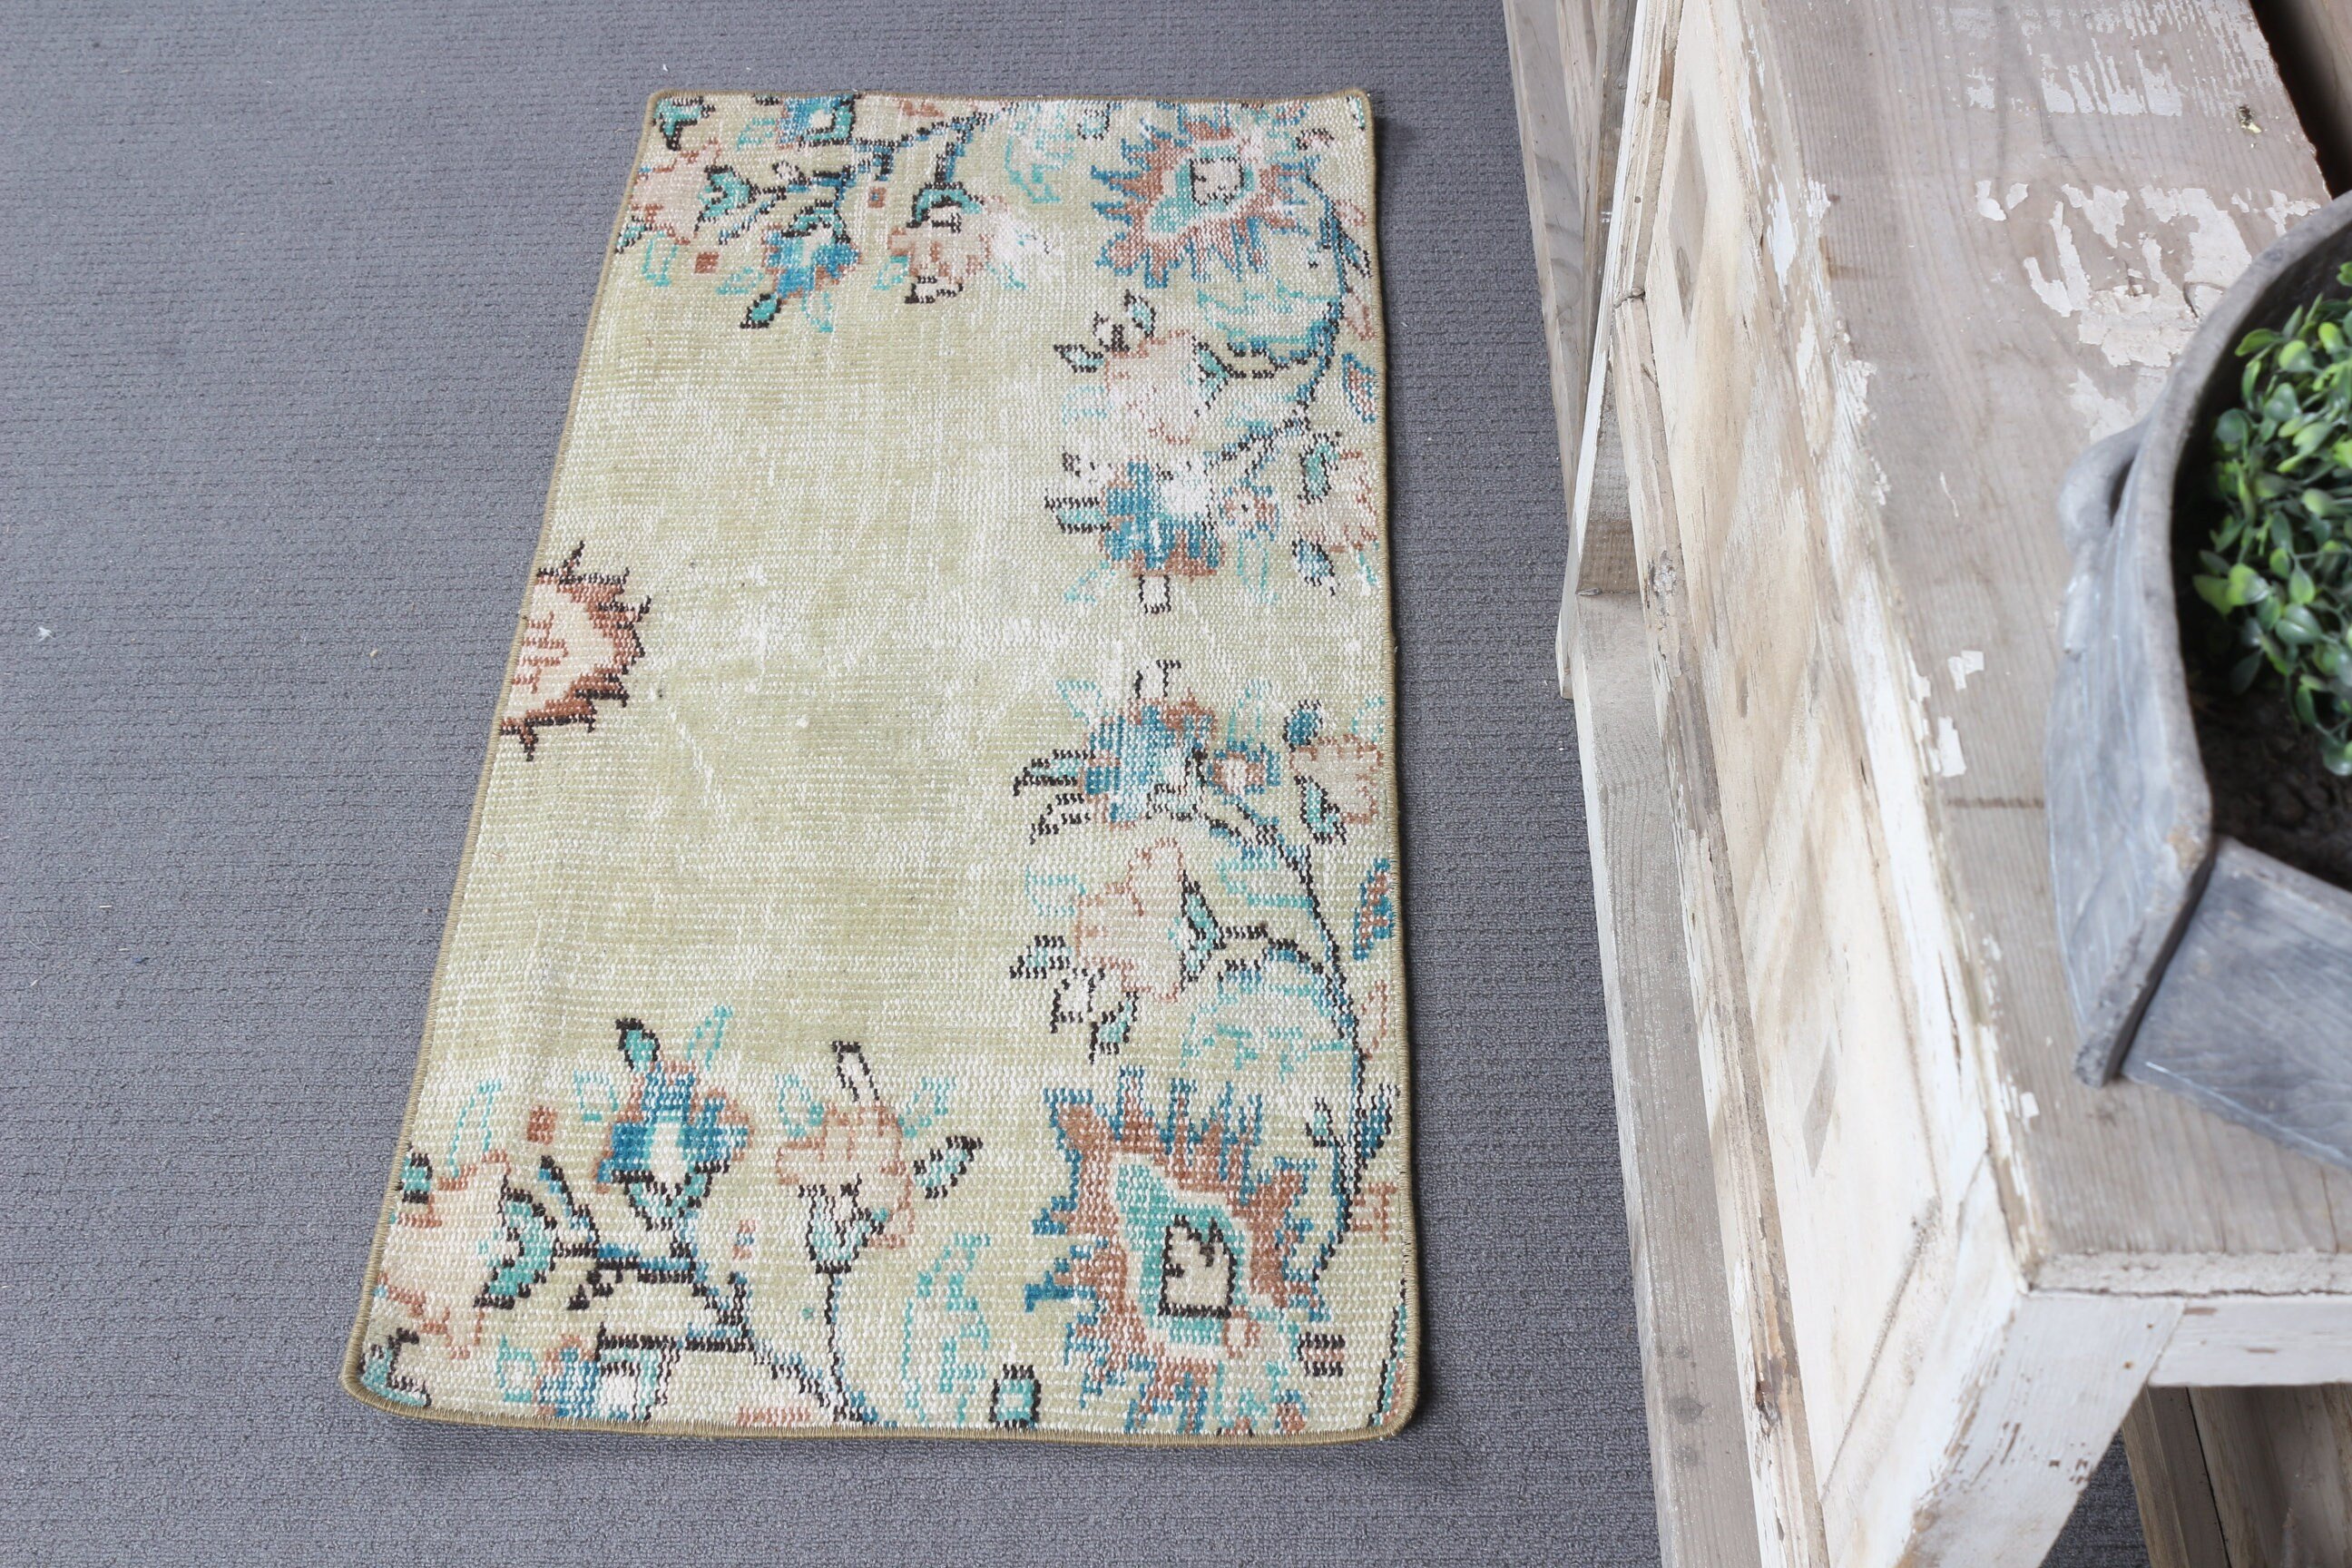 Antique Rugs, Door Mat Rug, Turkish Rugs, Kitchen Rugs, Ethnic Rug, Green  1.7x3.4 ft Small Rugs, Vintage Rug